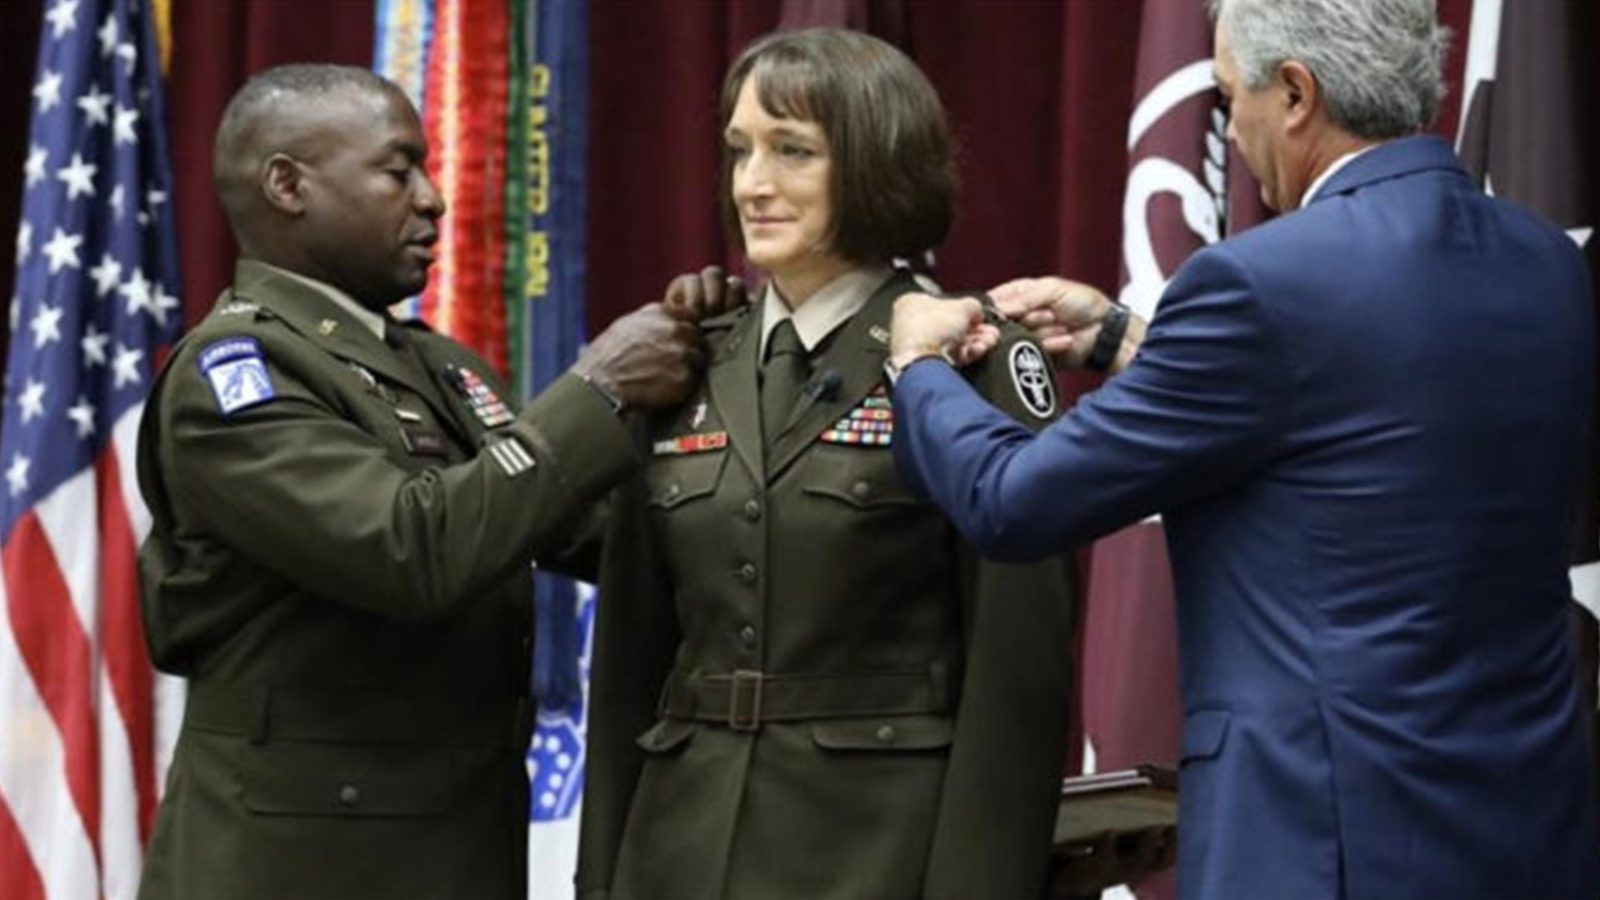 Robbins College and Army-Baylor alumna Deydre S. Teyhen, MPT ’95, DPT ’08, promoted to Brigadier General